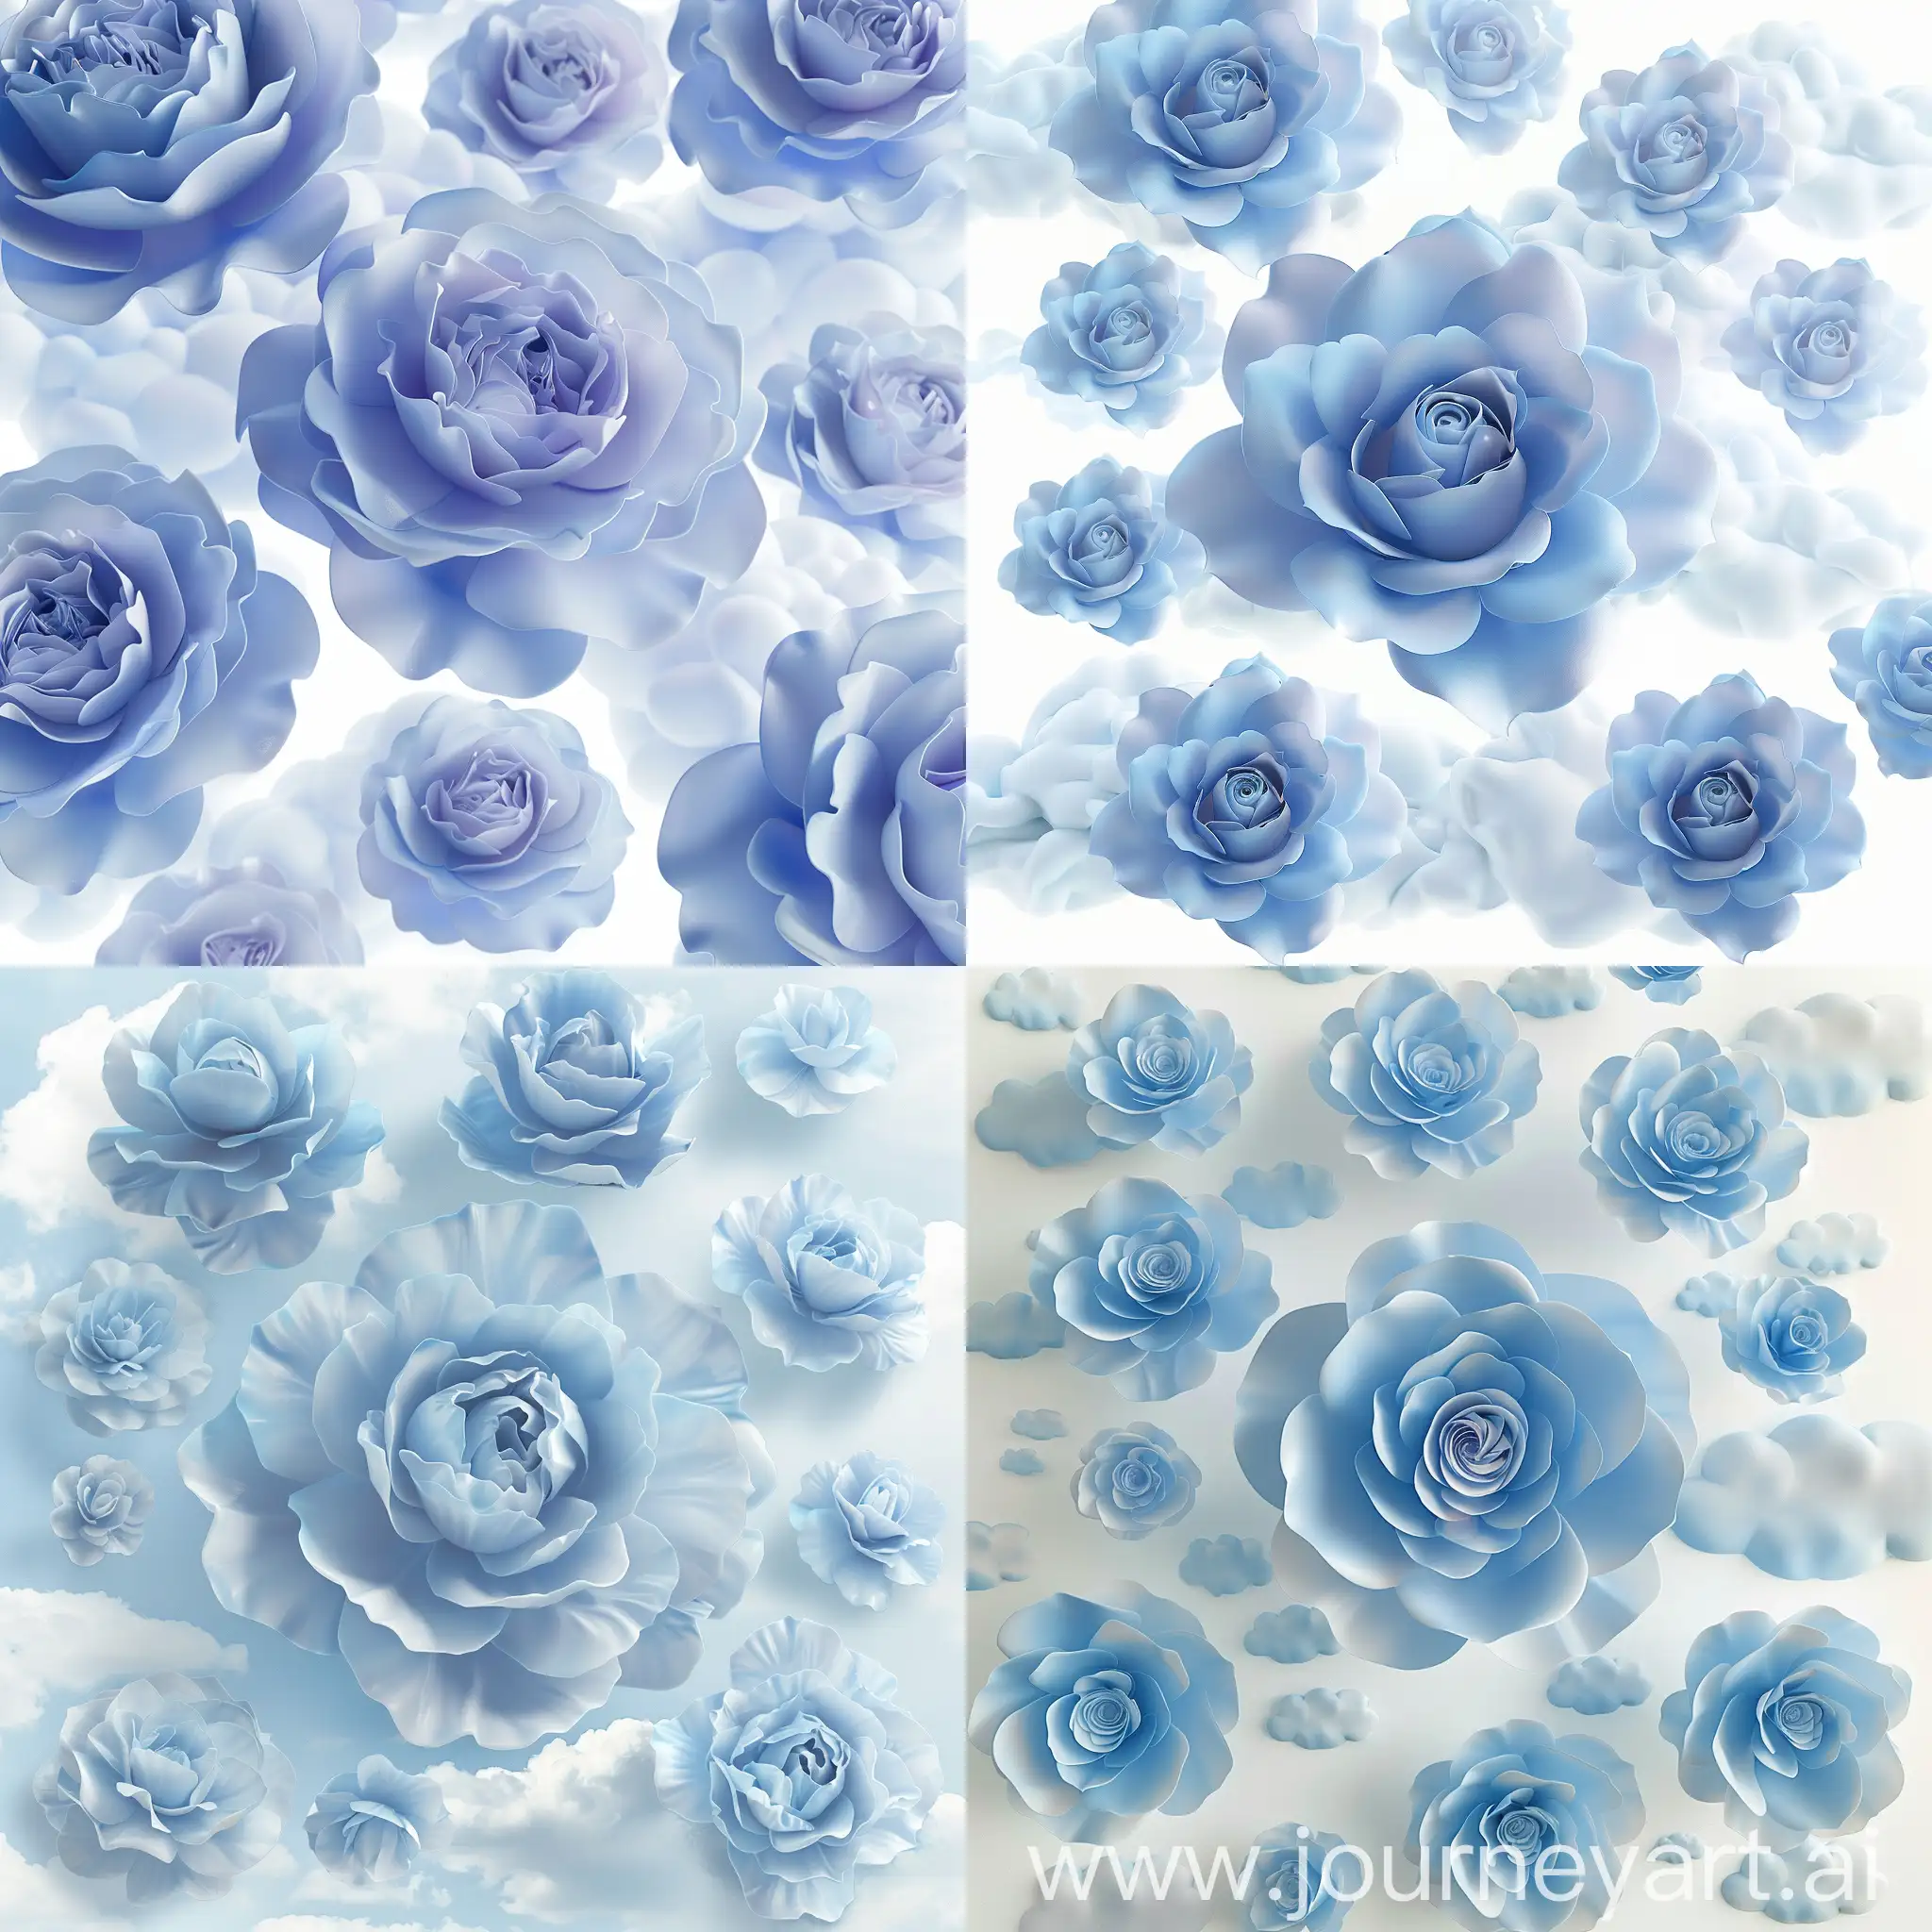 create a photo 3D gentle blue roses, soft blooming petals, very large flowers, each petal clearly detailed, used as a collage background for wedding photos, soft realistic flowers, clusters of many flowers, petals flexible flowers, capable of being isolated on a white background, , the petals must be soft, large, and soft and floating like clouds